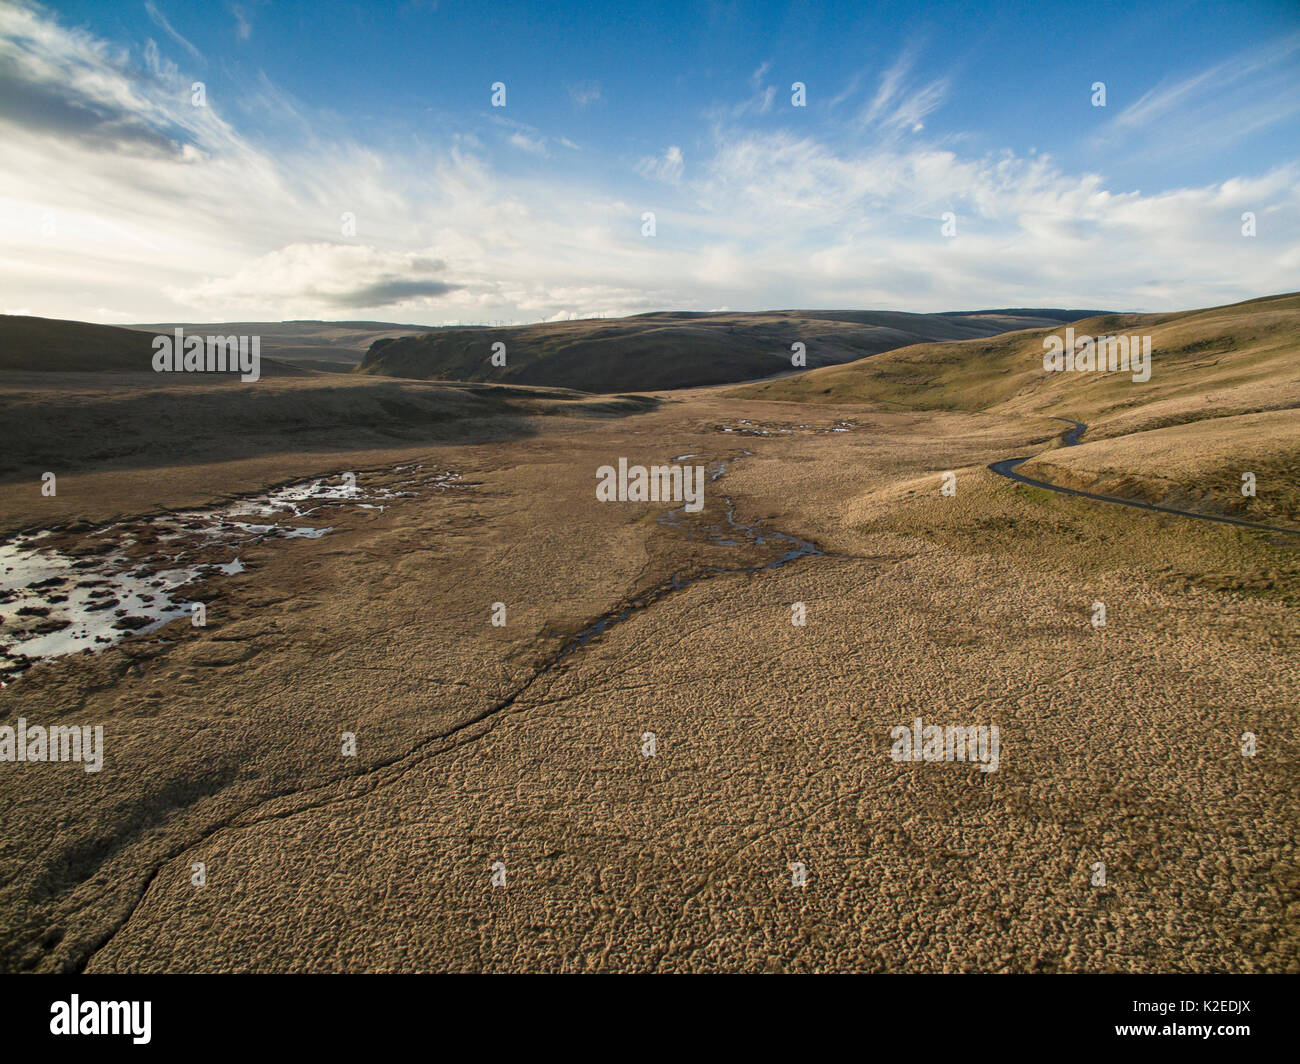 Upland blanket bog at a watershed between the River Elan system and the Ystwyth system flowing westwards, Rhayader, Wales, UK April Stock Photo